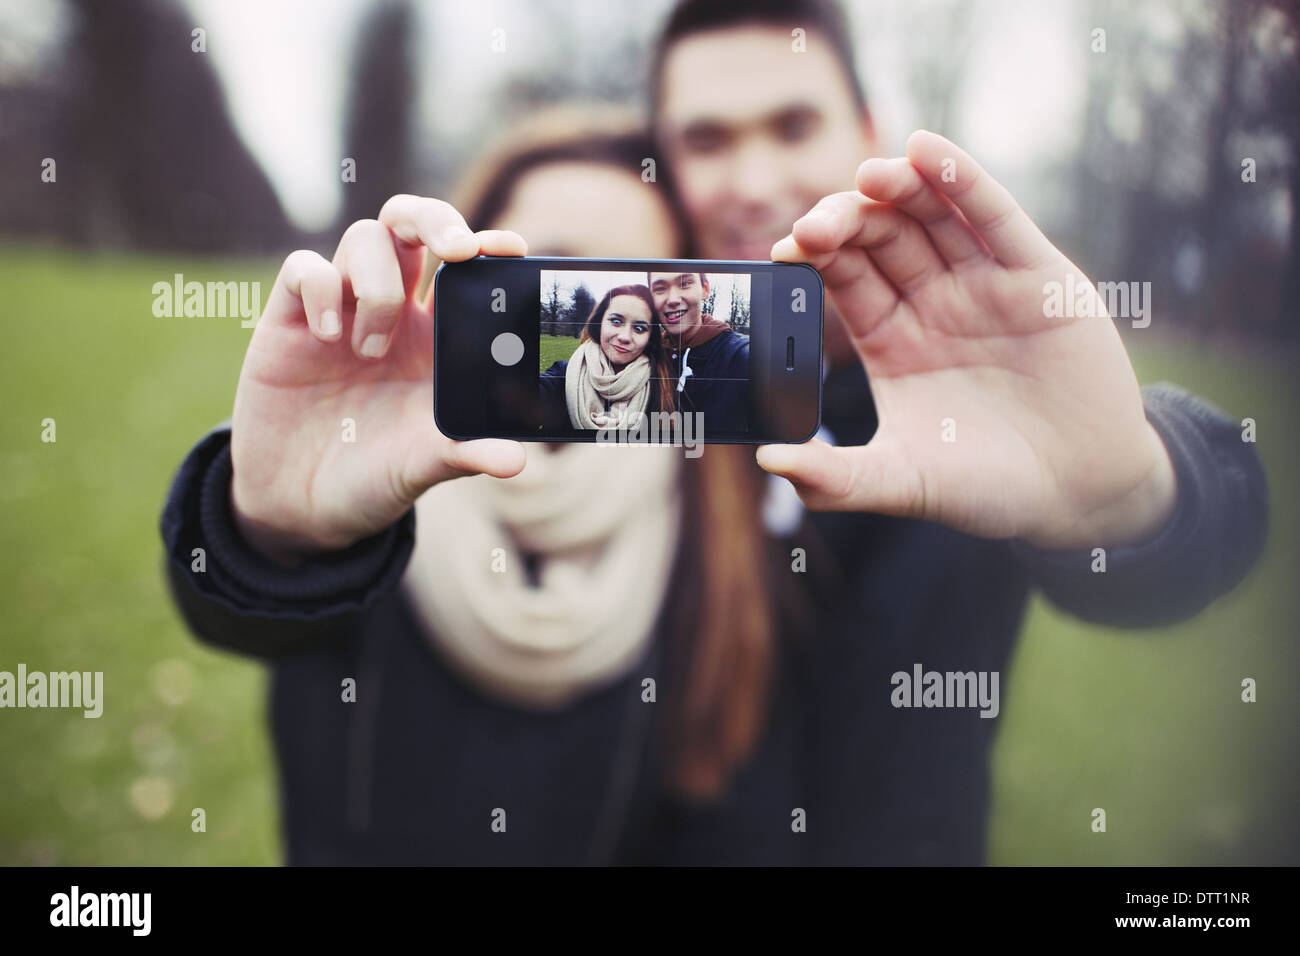 Mixed race young boy and girl making a funny face while taking a self portrait with mobile phone. Cute young couple. Stock Photo